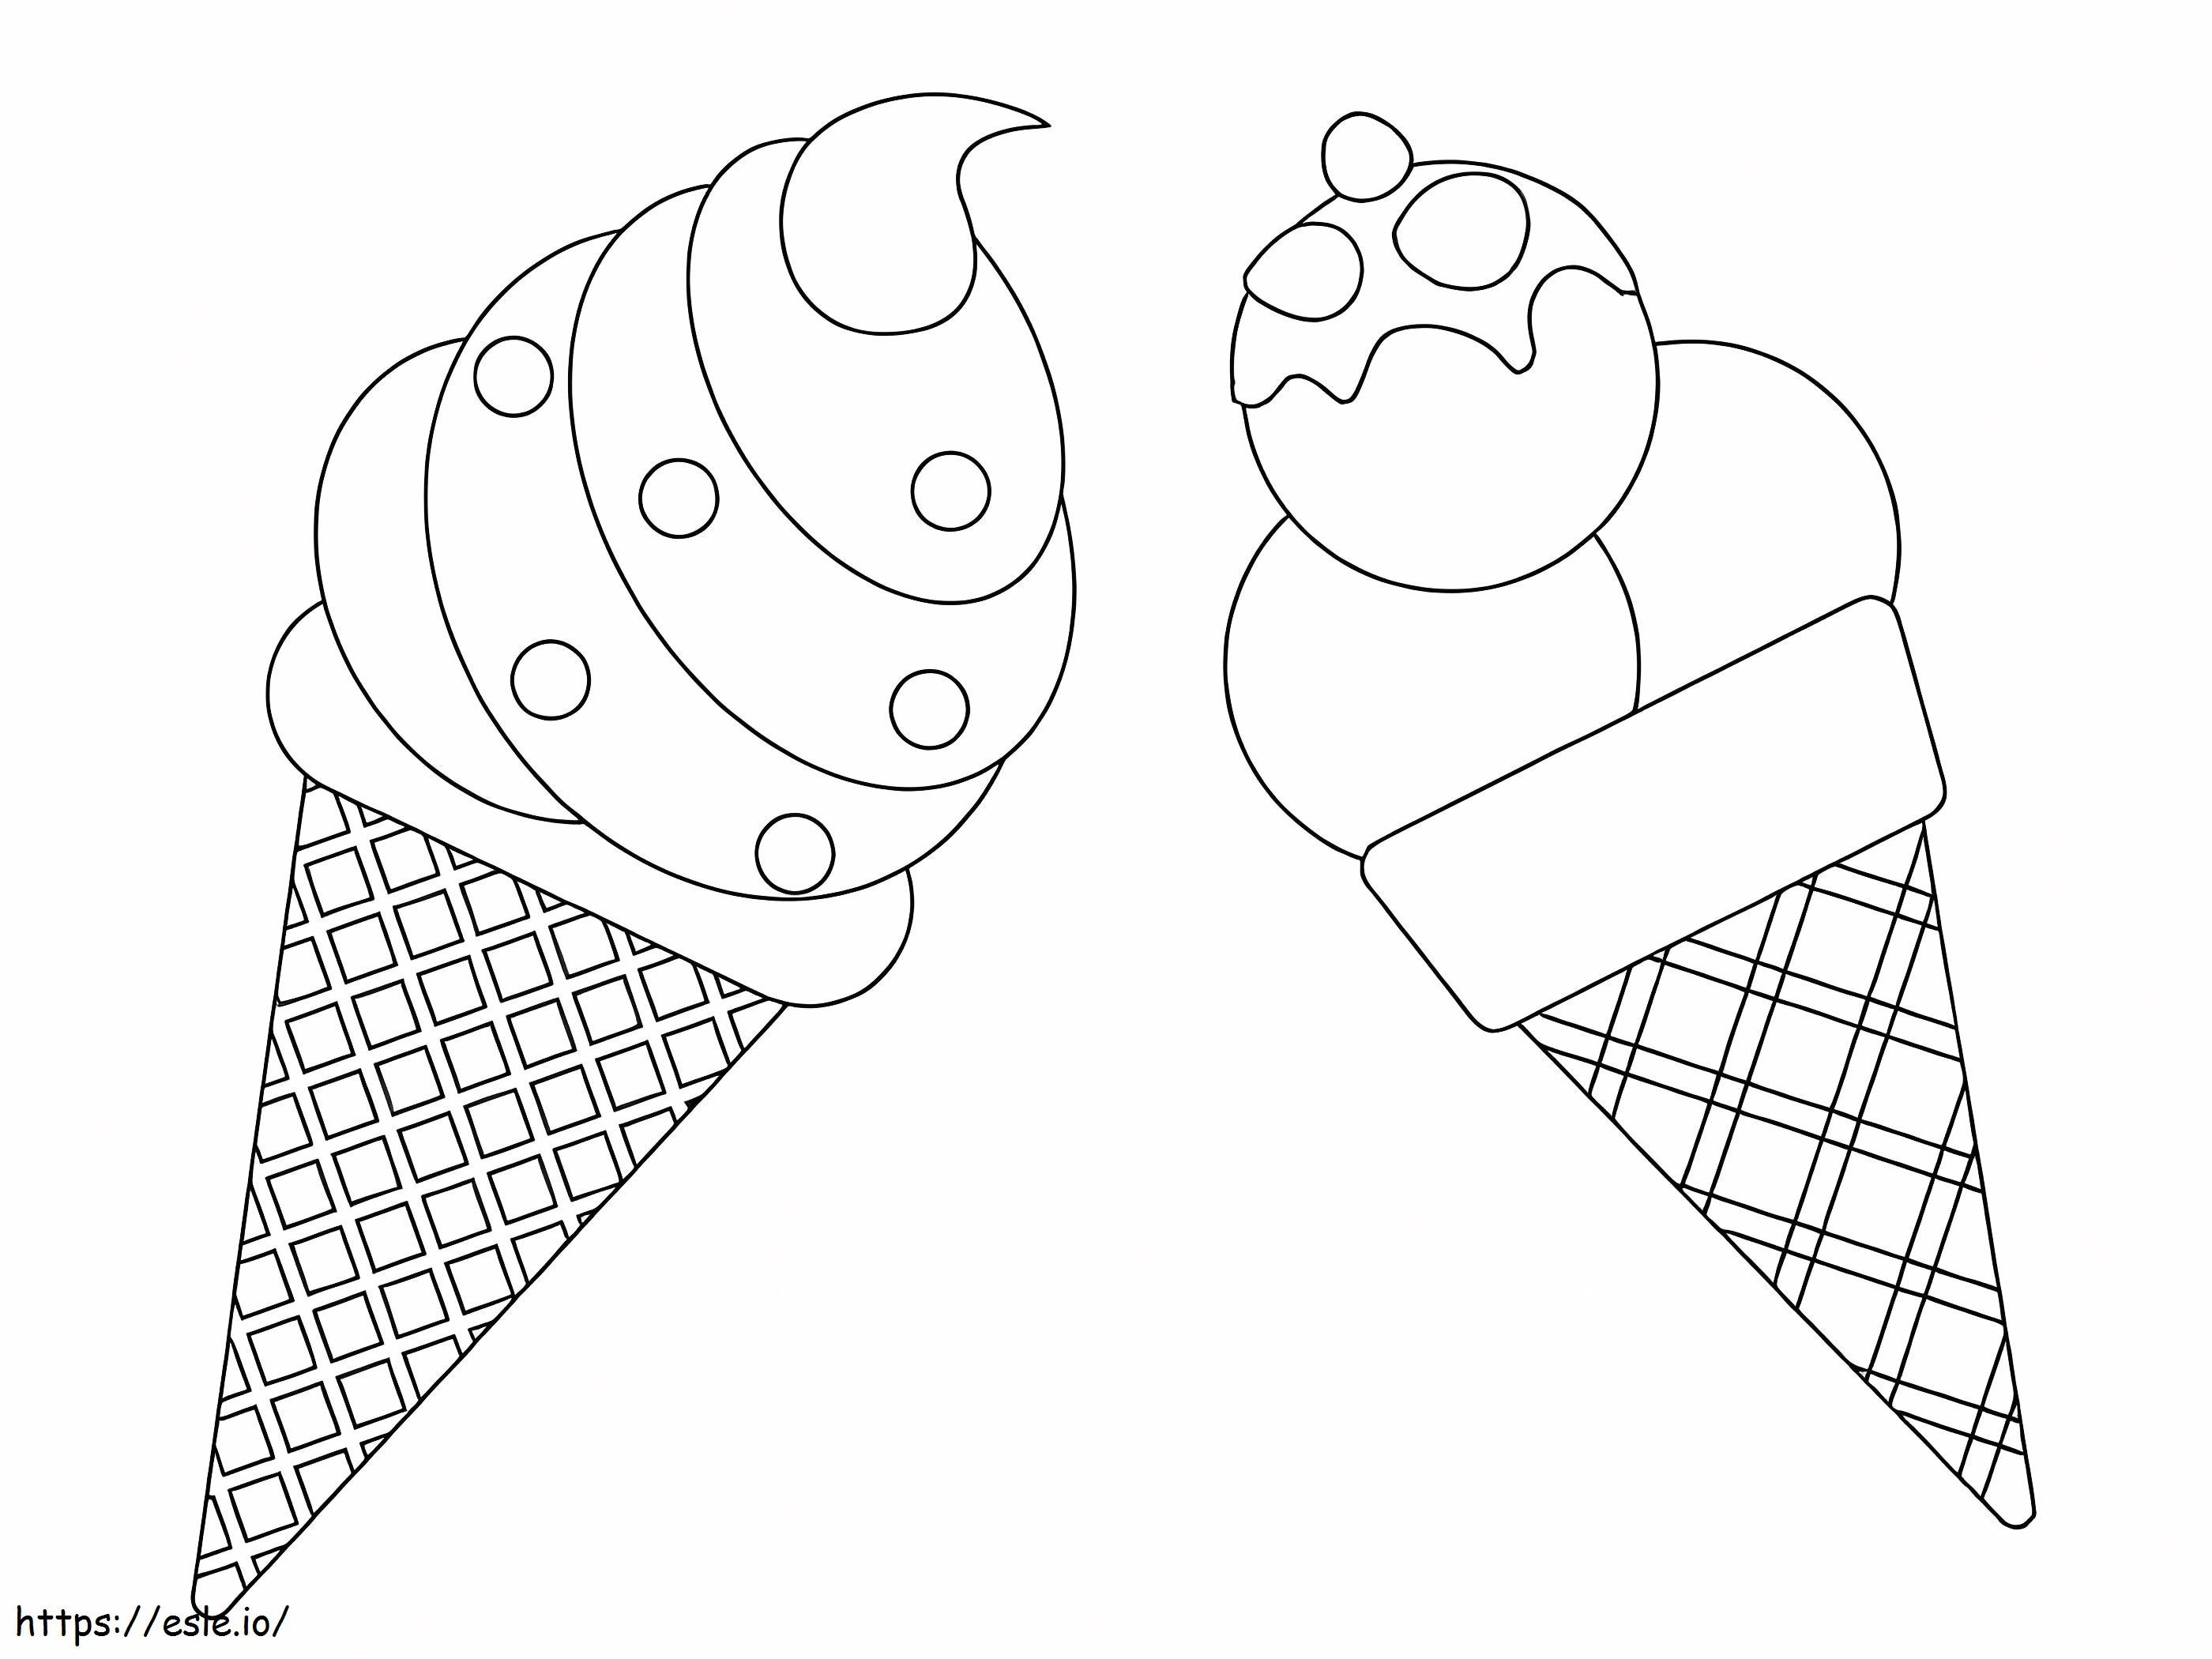 Two Ice Creams coloring page